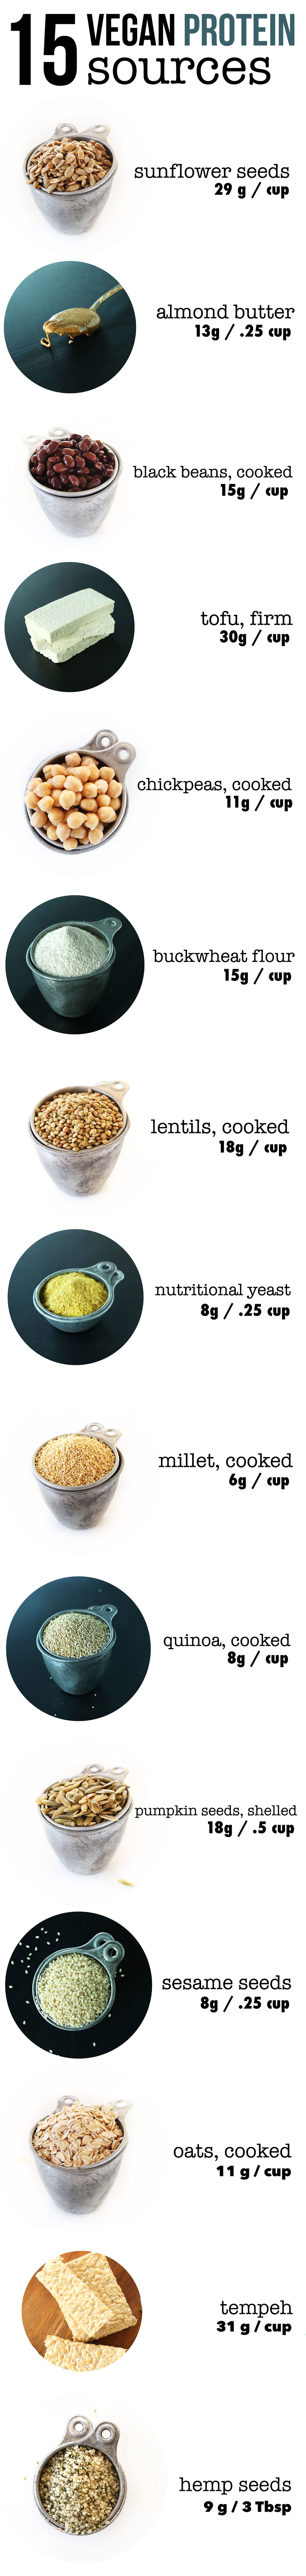 Graphic of 16 vegan protein sources, including chickpeas, tofu, nutritional yeast, and more